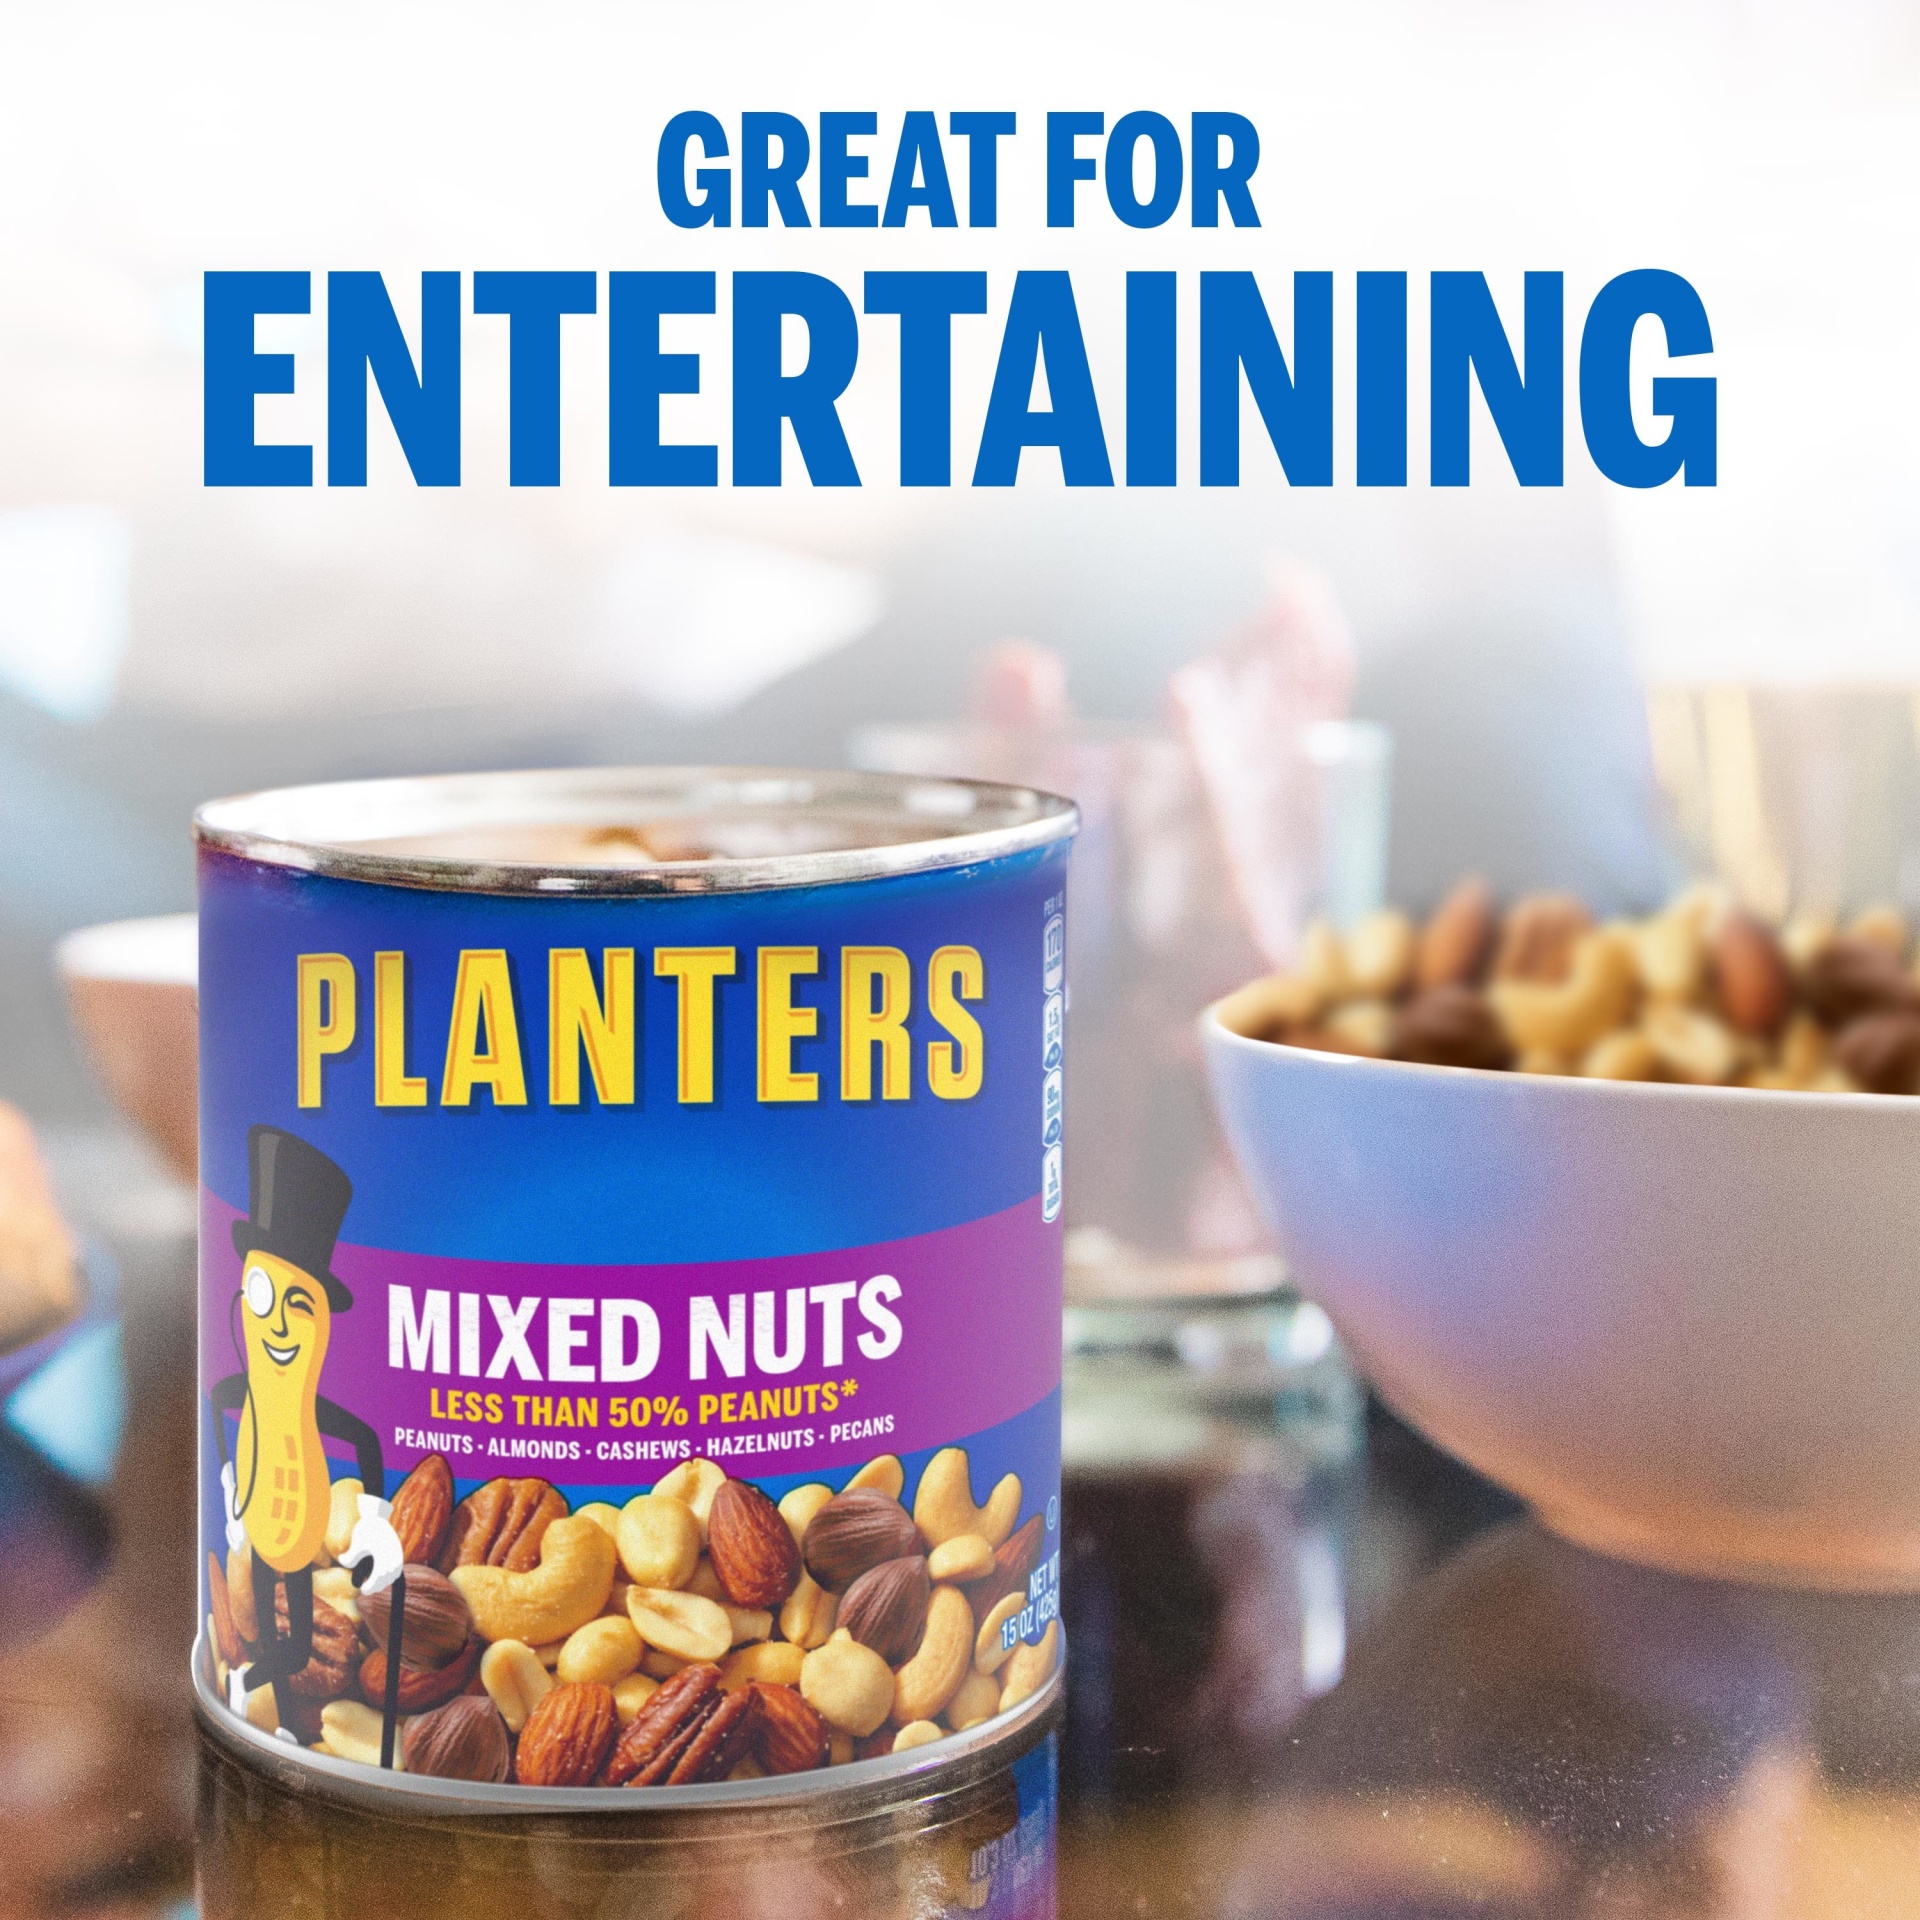 slide 5 of 14, Planters Mixed Nuts Less Than 50% Peanuts with Peanuts, Almonds, Cashews, Hazelnuts & Pecans, 15 oz